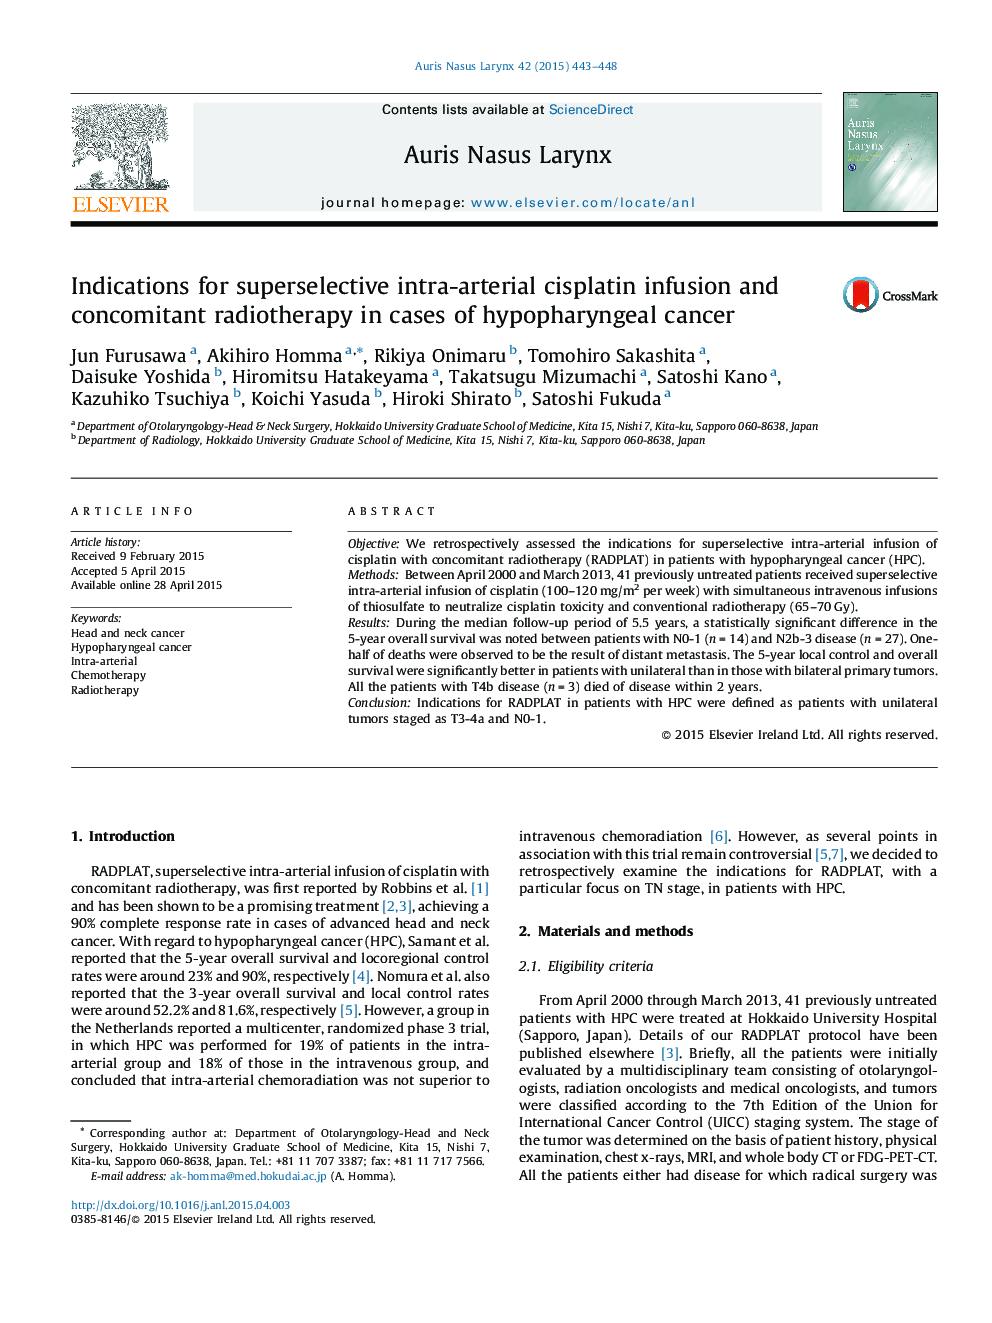 Indications for superselective intra-arterial cisplatin infusion and concomitant radiotherapy in cases of hypopharyngeal cancer